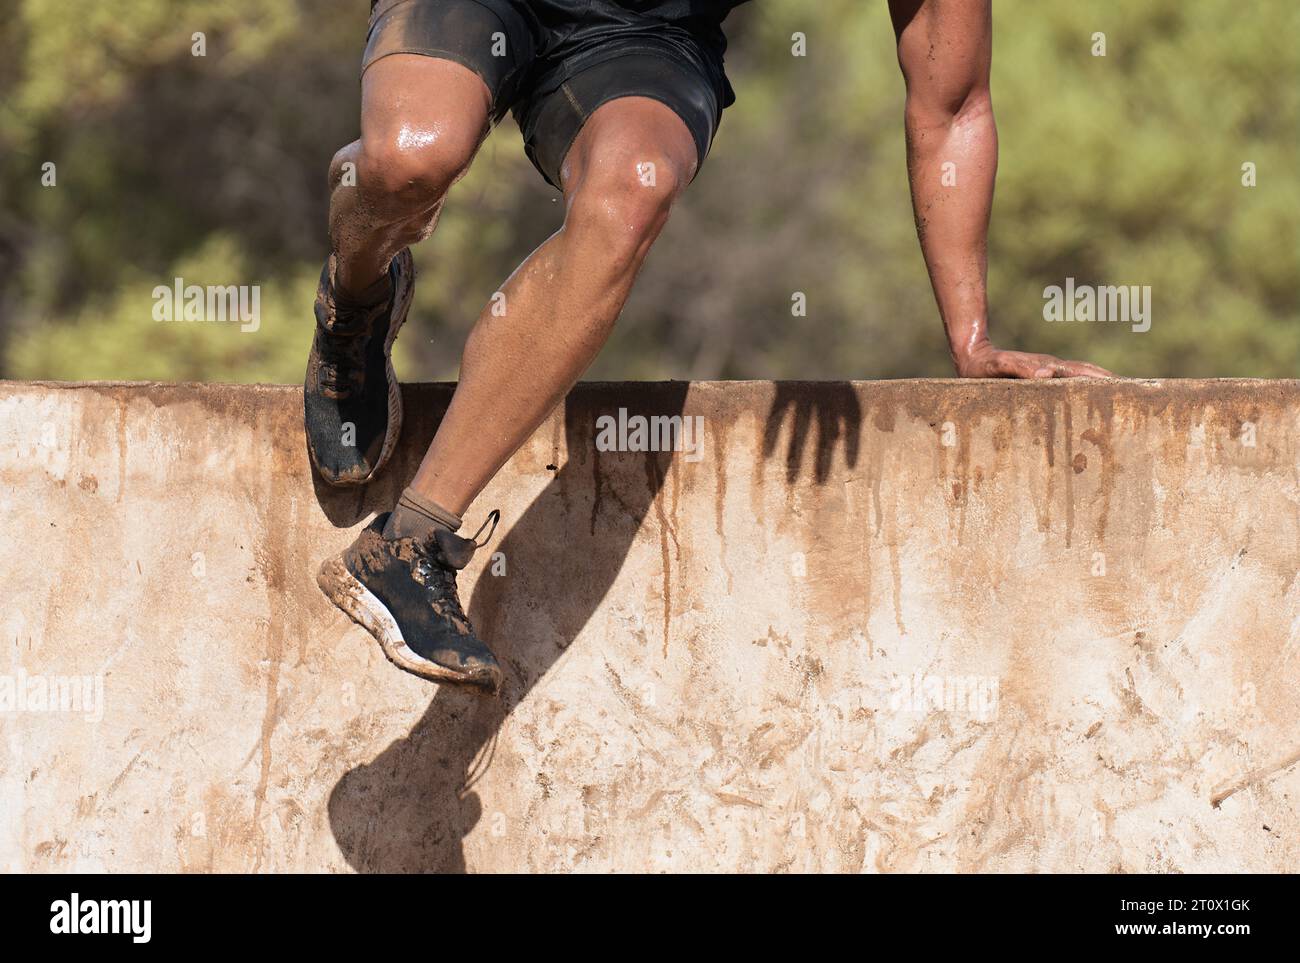 Mud race runners running over obstacles extreme sport Stock Photo